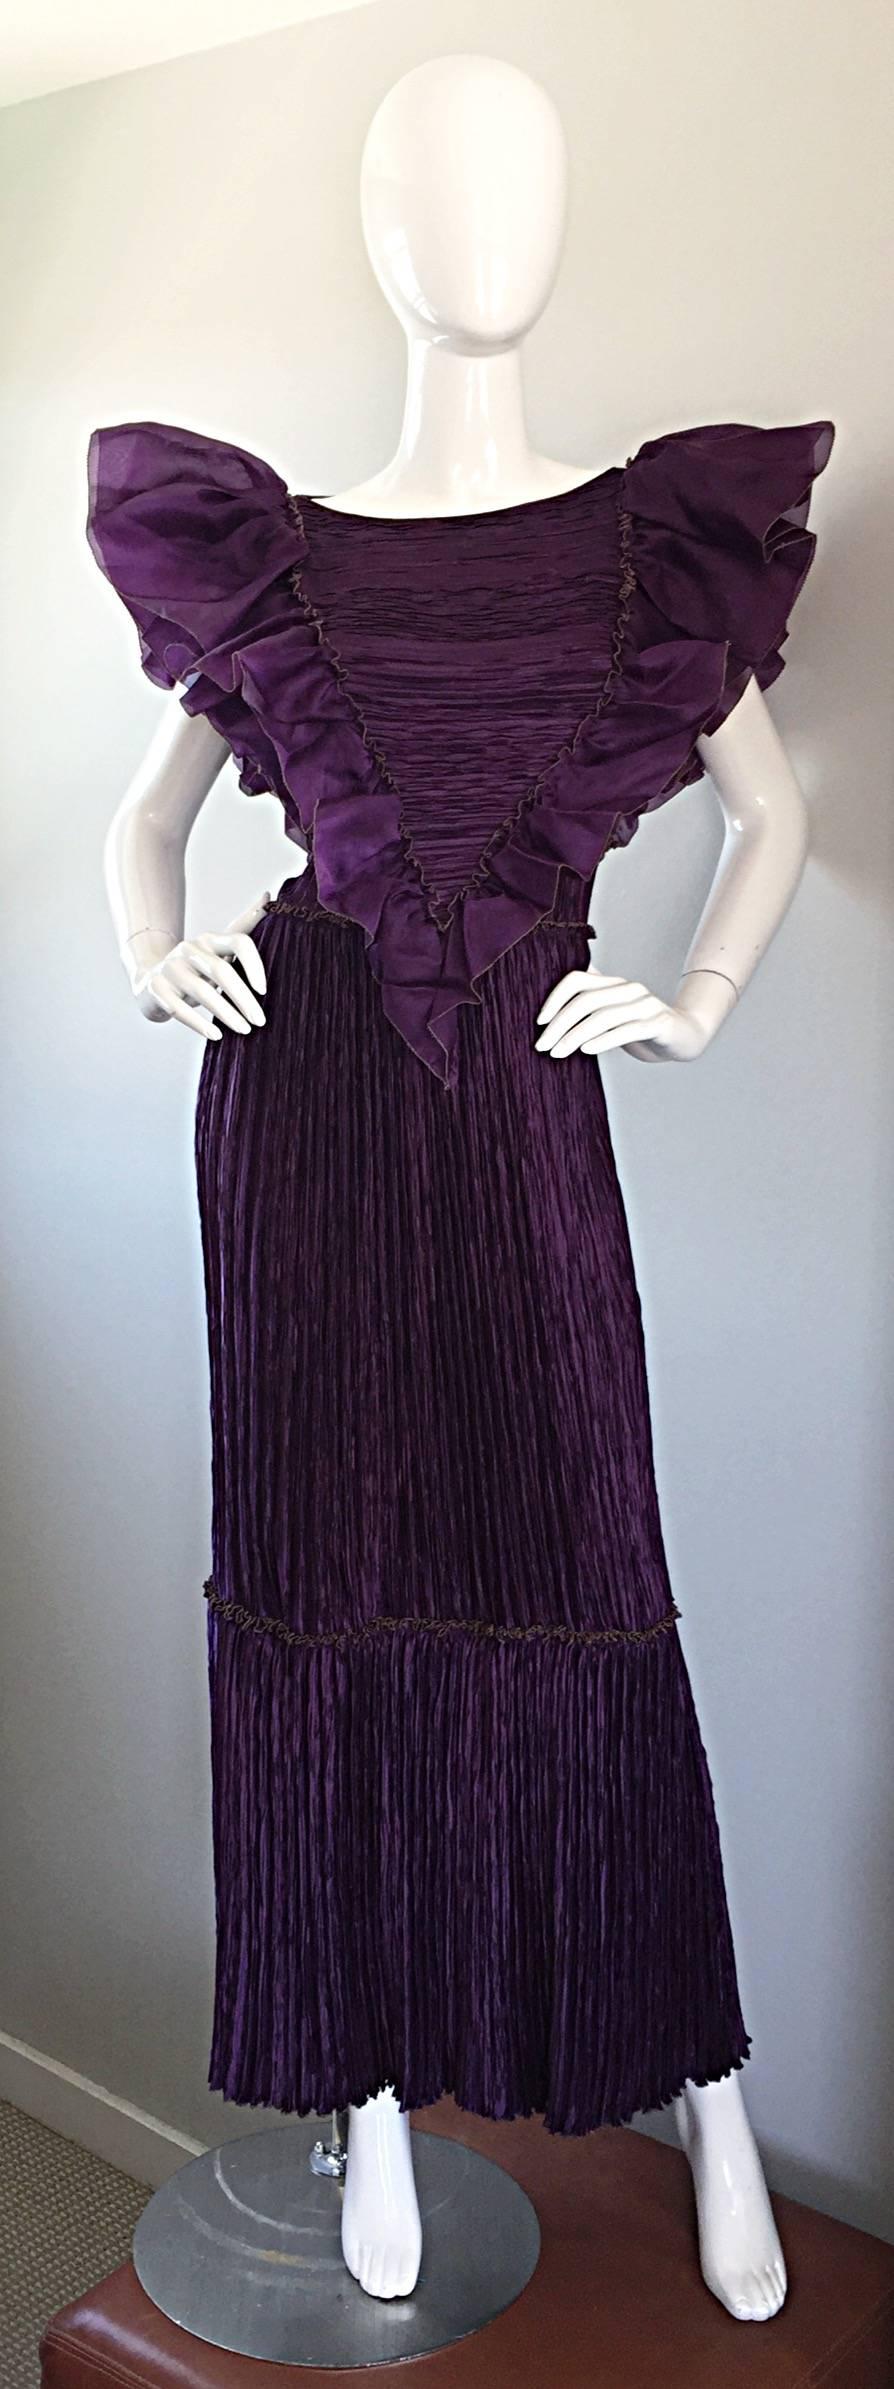 Amazing vintage 1980s MARY MCFADDEN, for BONWIT TELLER, purple eggplant Fortuny pleated silk gown! Features Avant Garde Ruffles at each shoulder, with gold silk thread at the edges. Accordion pleated skirt, with a slight trumpet hem. Hidden zipper